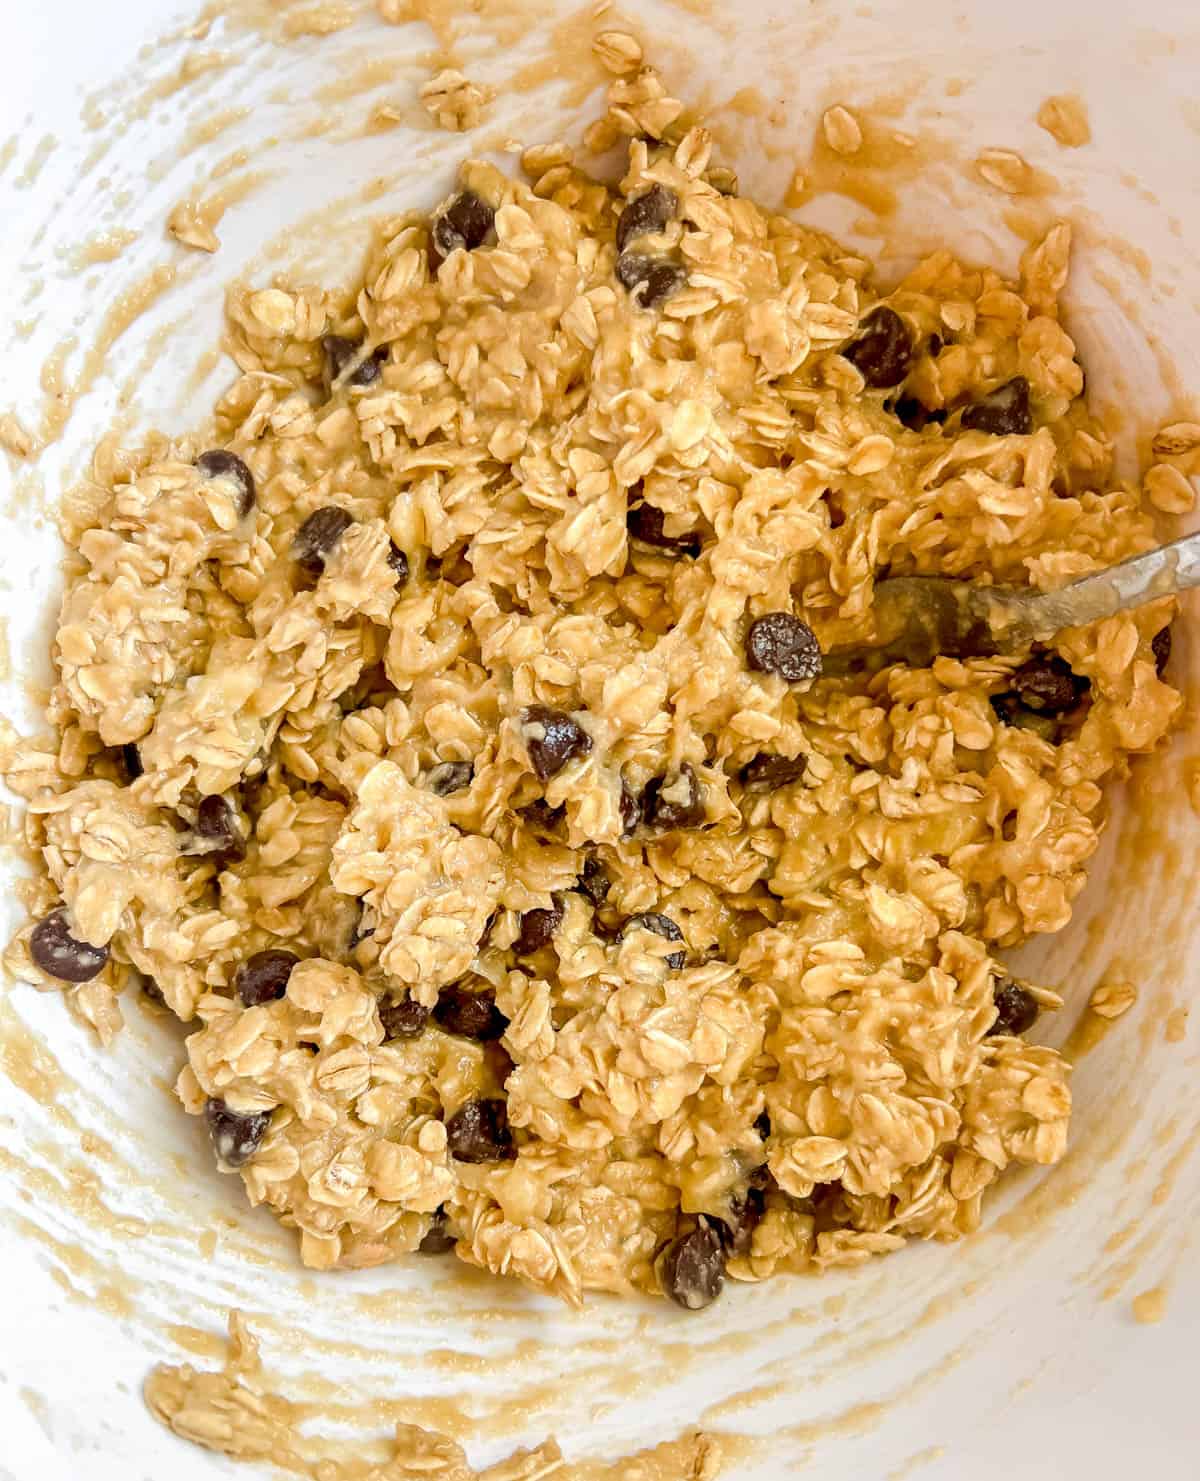 Chocolate chips mixed into the batter.